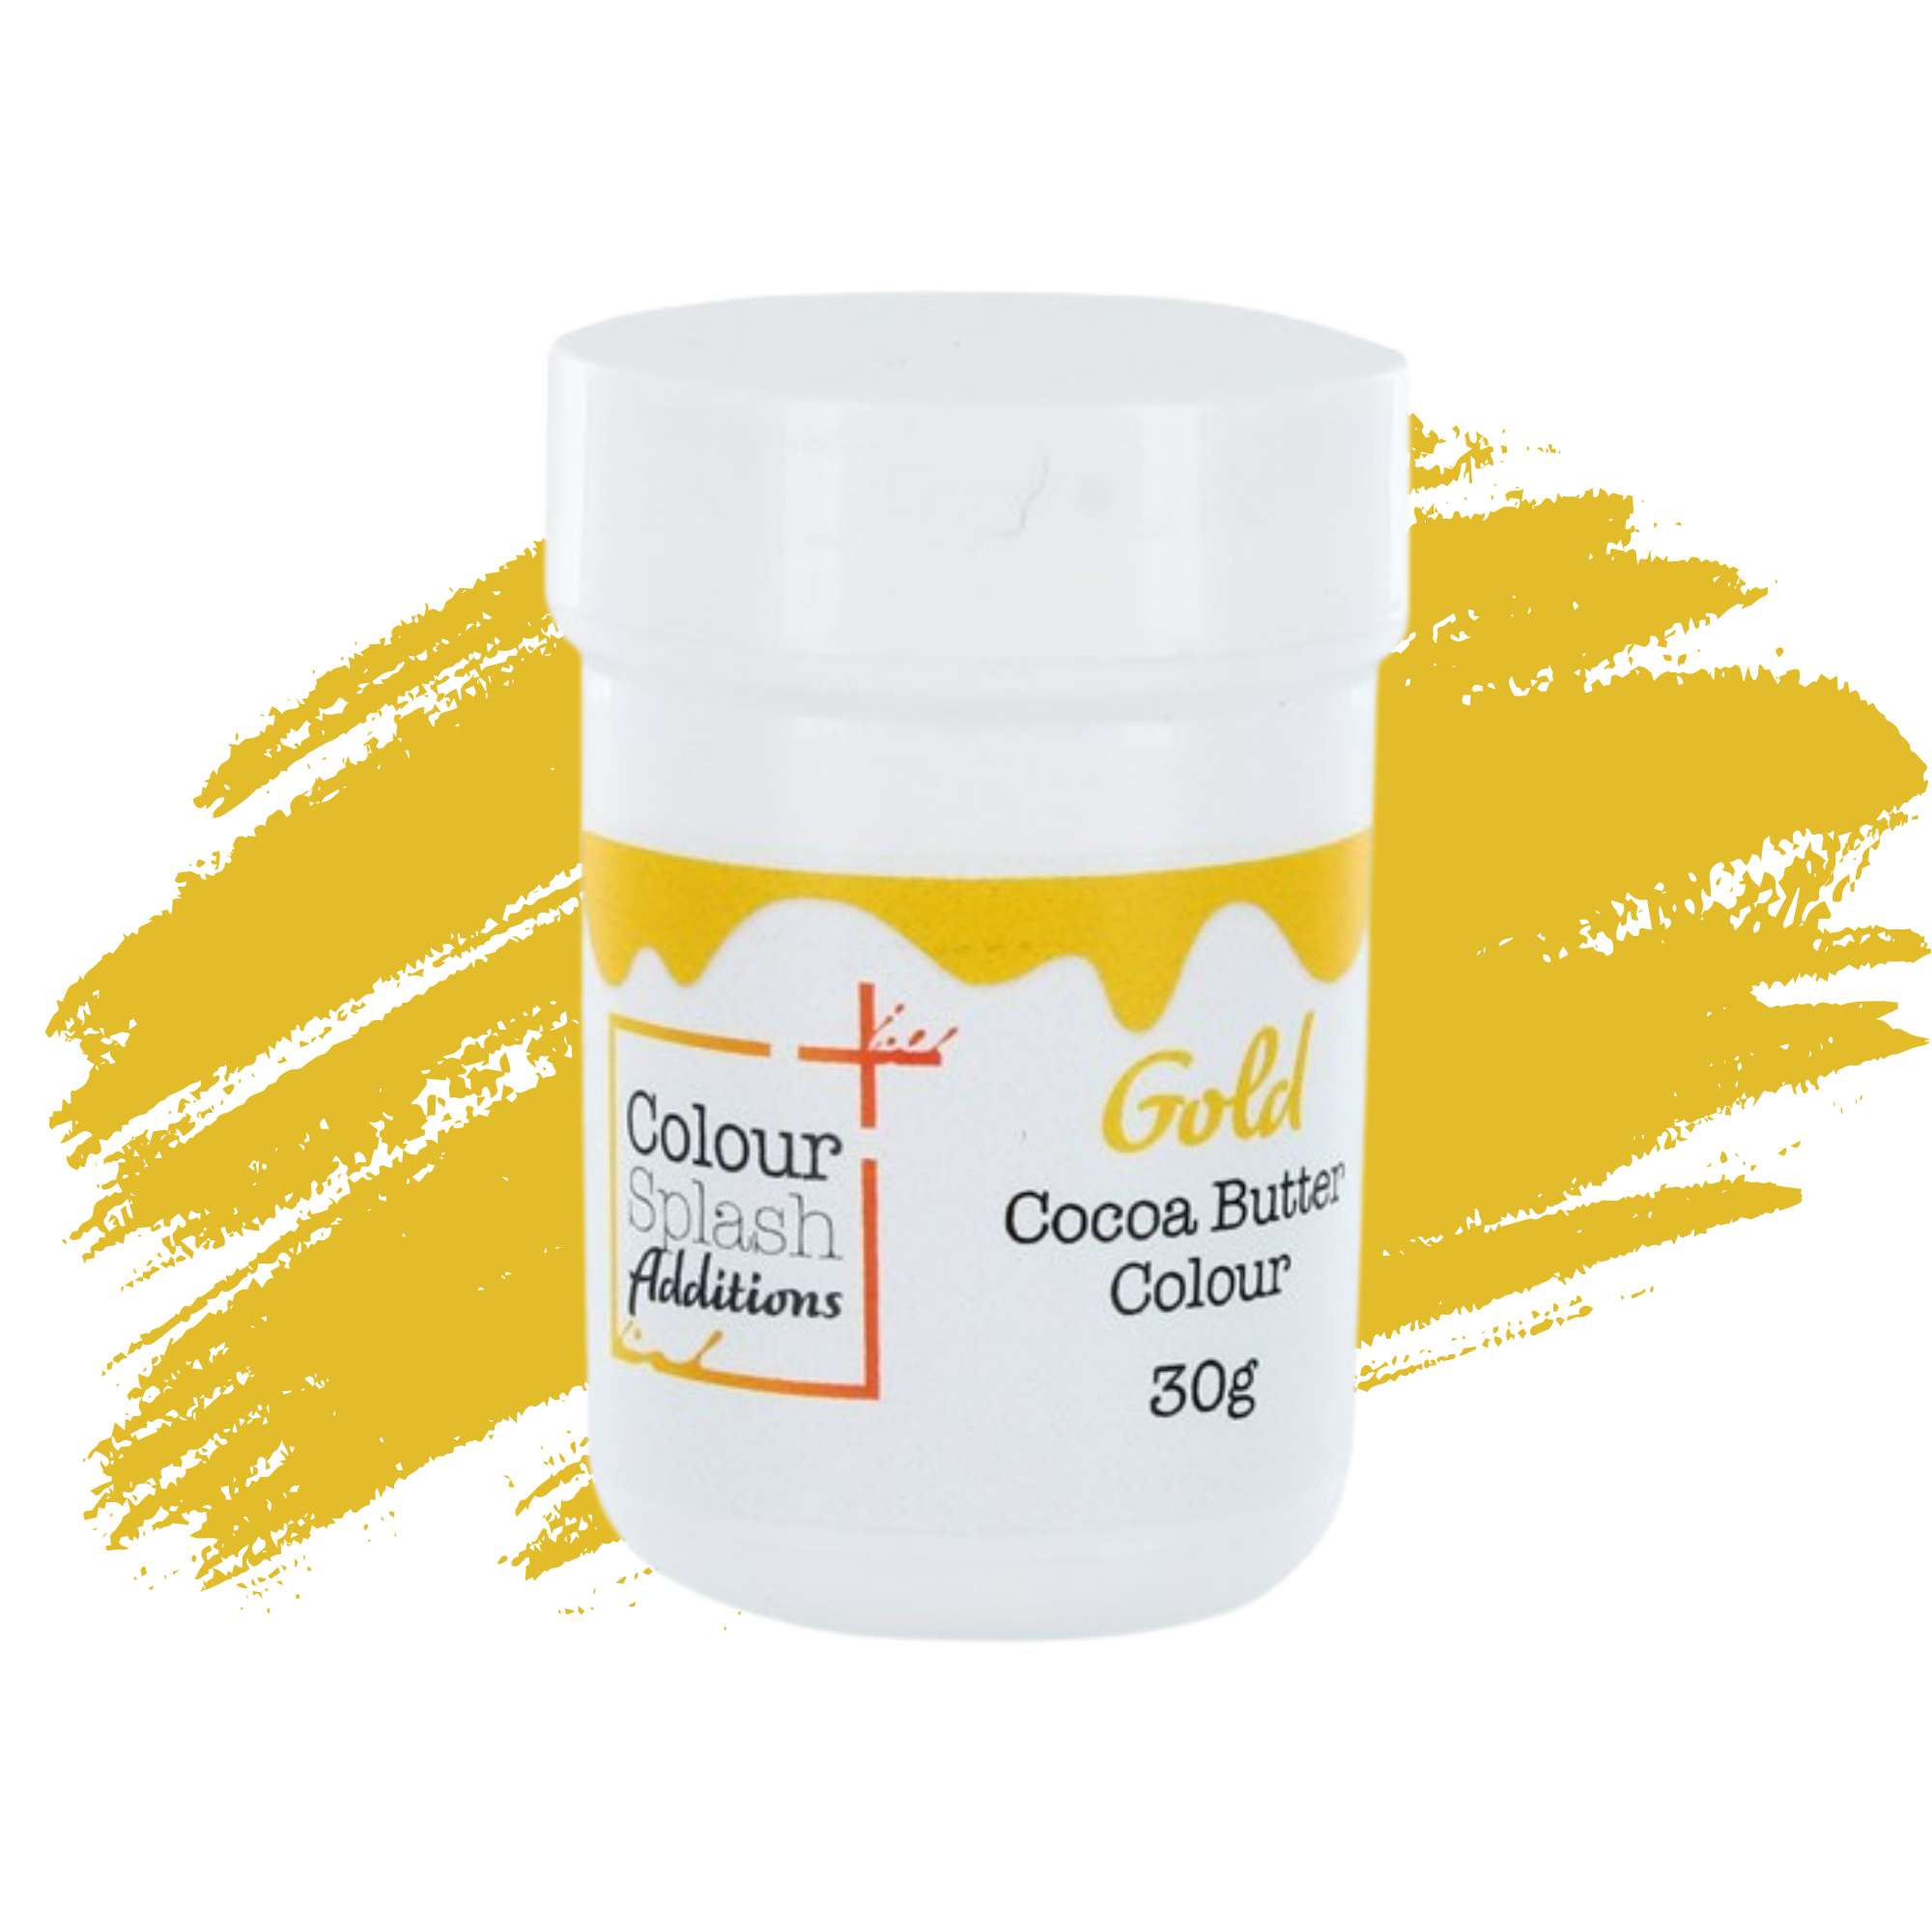 Colour Splash Additions - Cocoa Butter Edible Food Chocolate Colour - Gold 30g